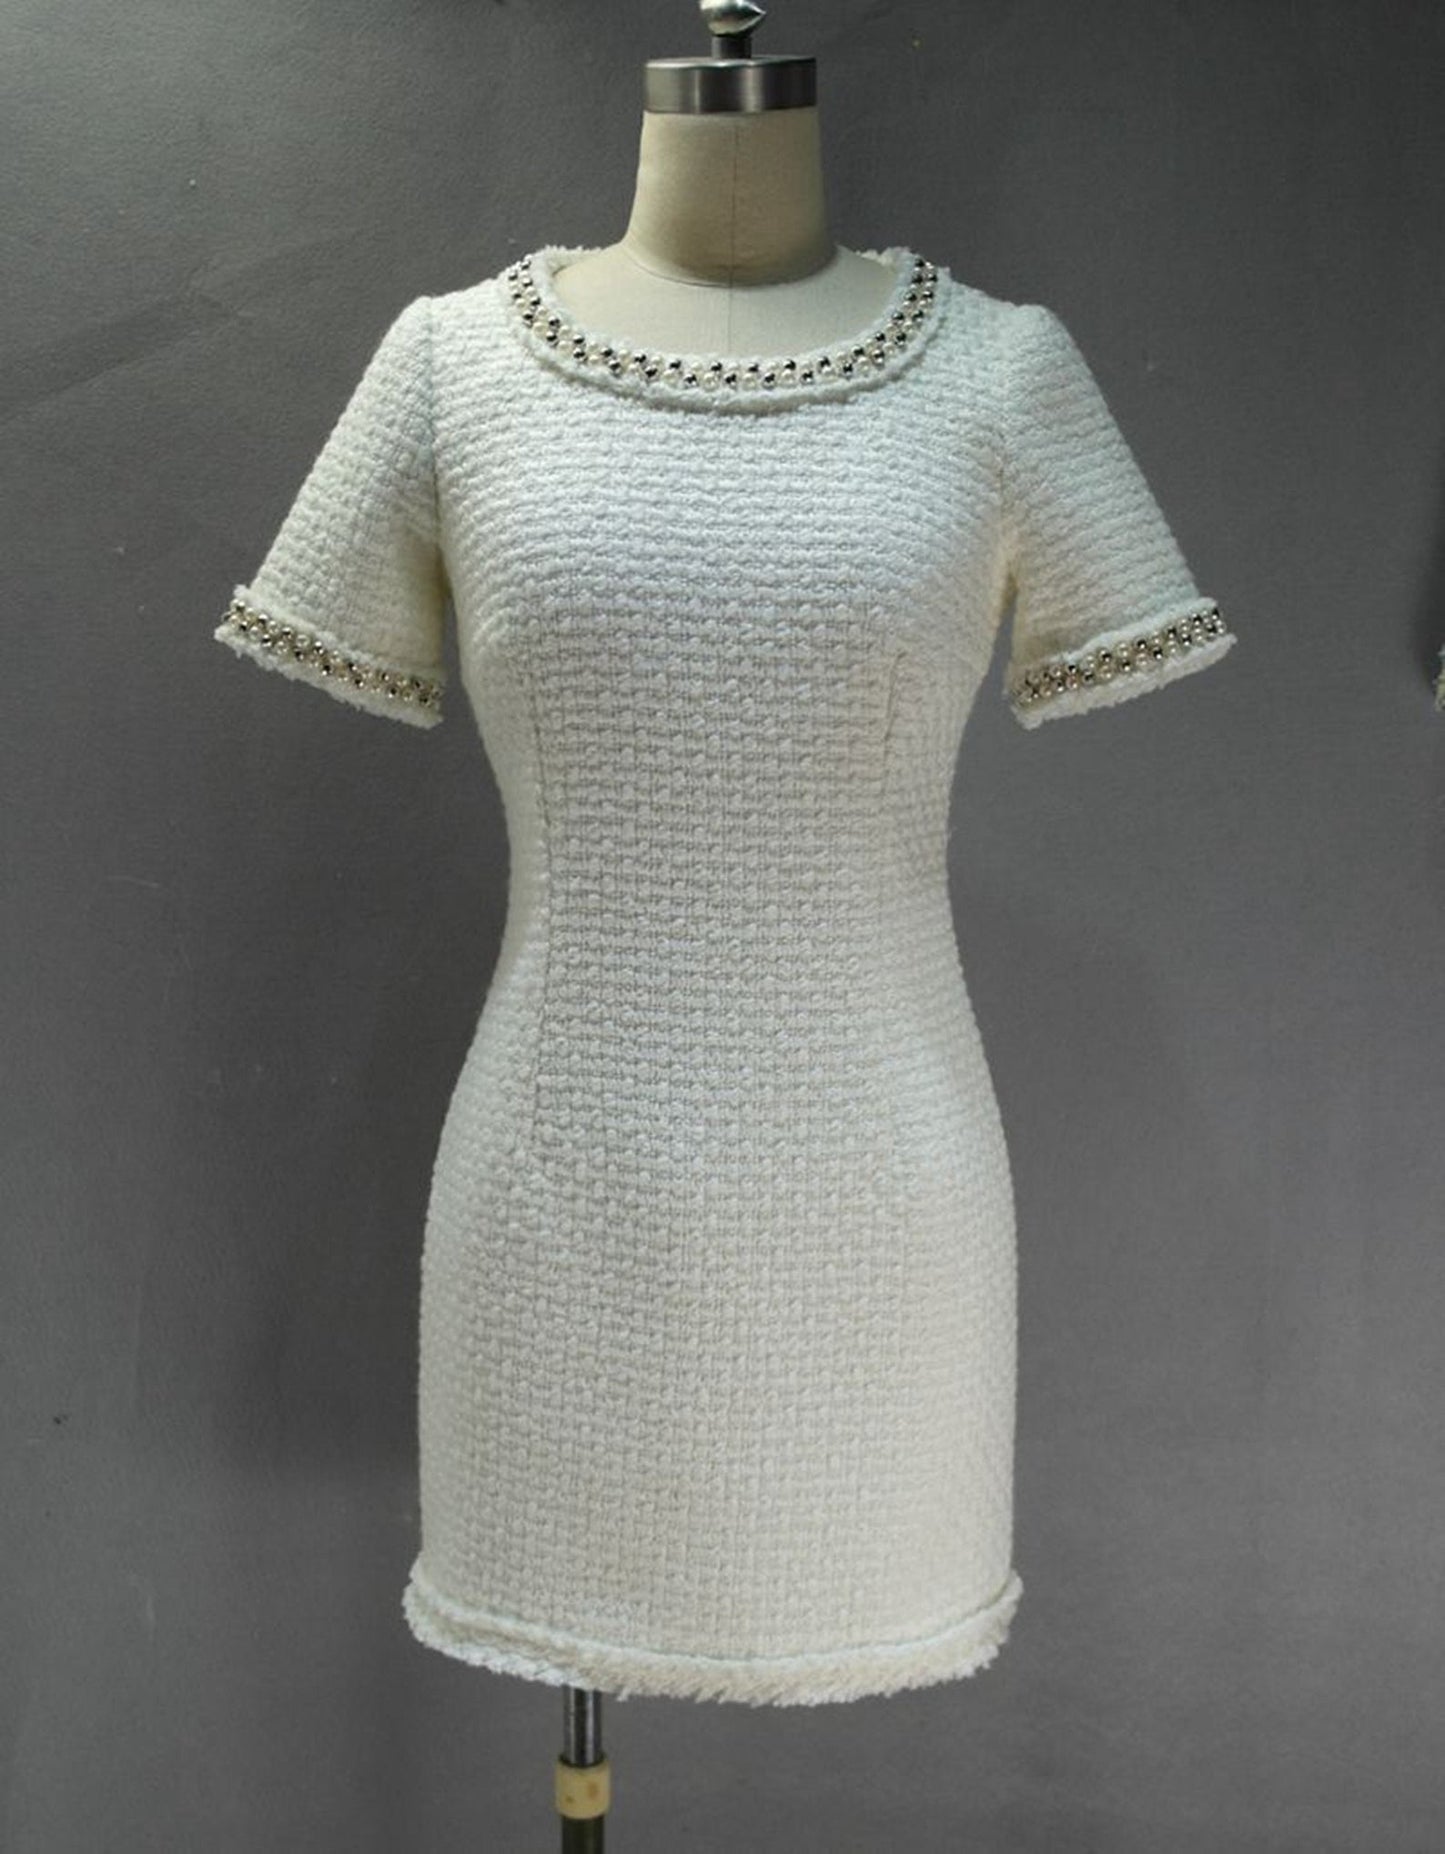 Sheath Custom Made Pearls White WOOL Tweed Dress  UK CUSTOMER SERVICE! Sheath Custom Made Pearls White WOOL Tweed Dress - Round neck and arm with gold and pearl button designed. Knee Length Sheath Dress. Our tailor will make sharp body measurement and look perfect fit. You will love this casual sheath dress! It's a must-have piece in your wardrobe with its simple silhouette and slight A-line shape.